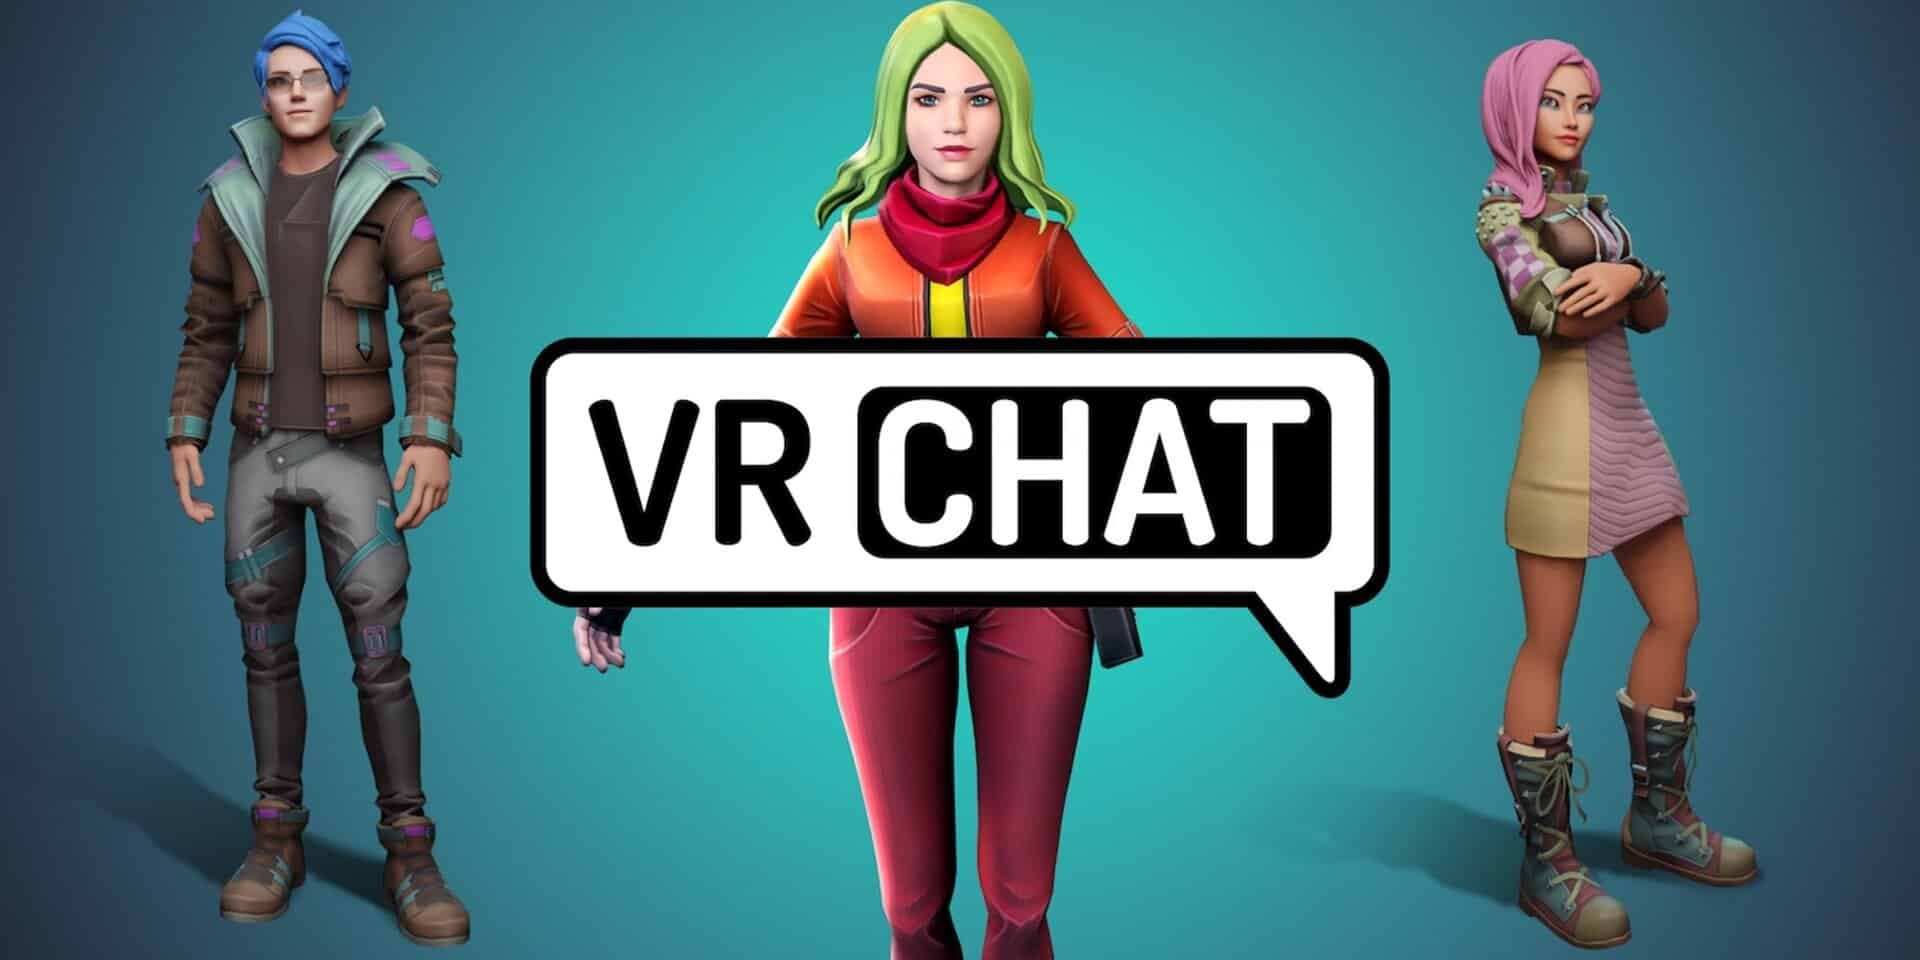 How To Change Your Avatar in VRChat